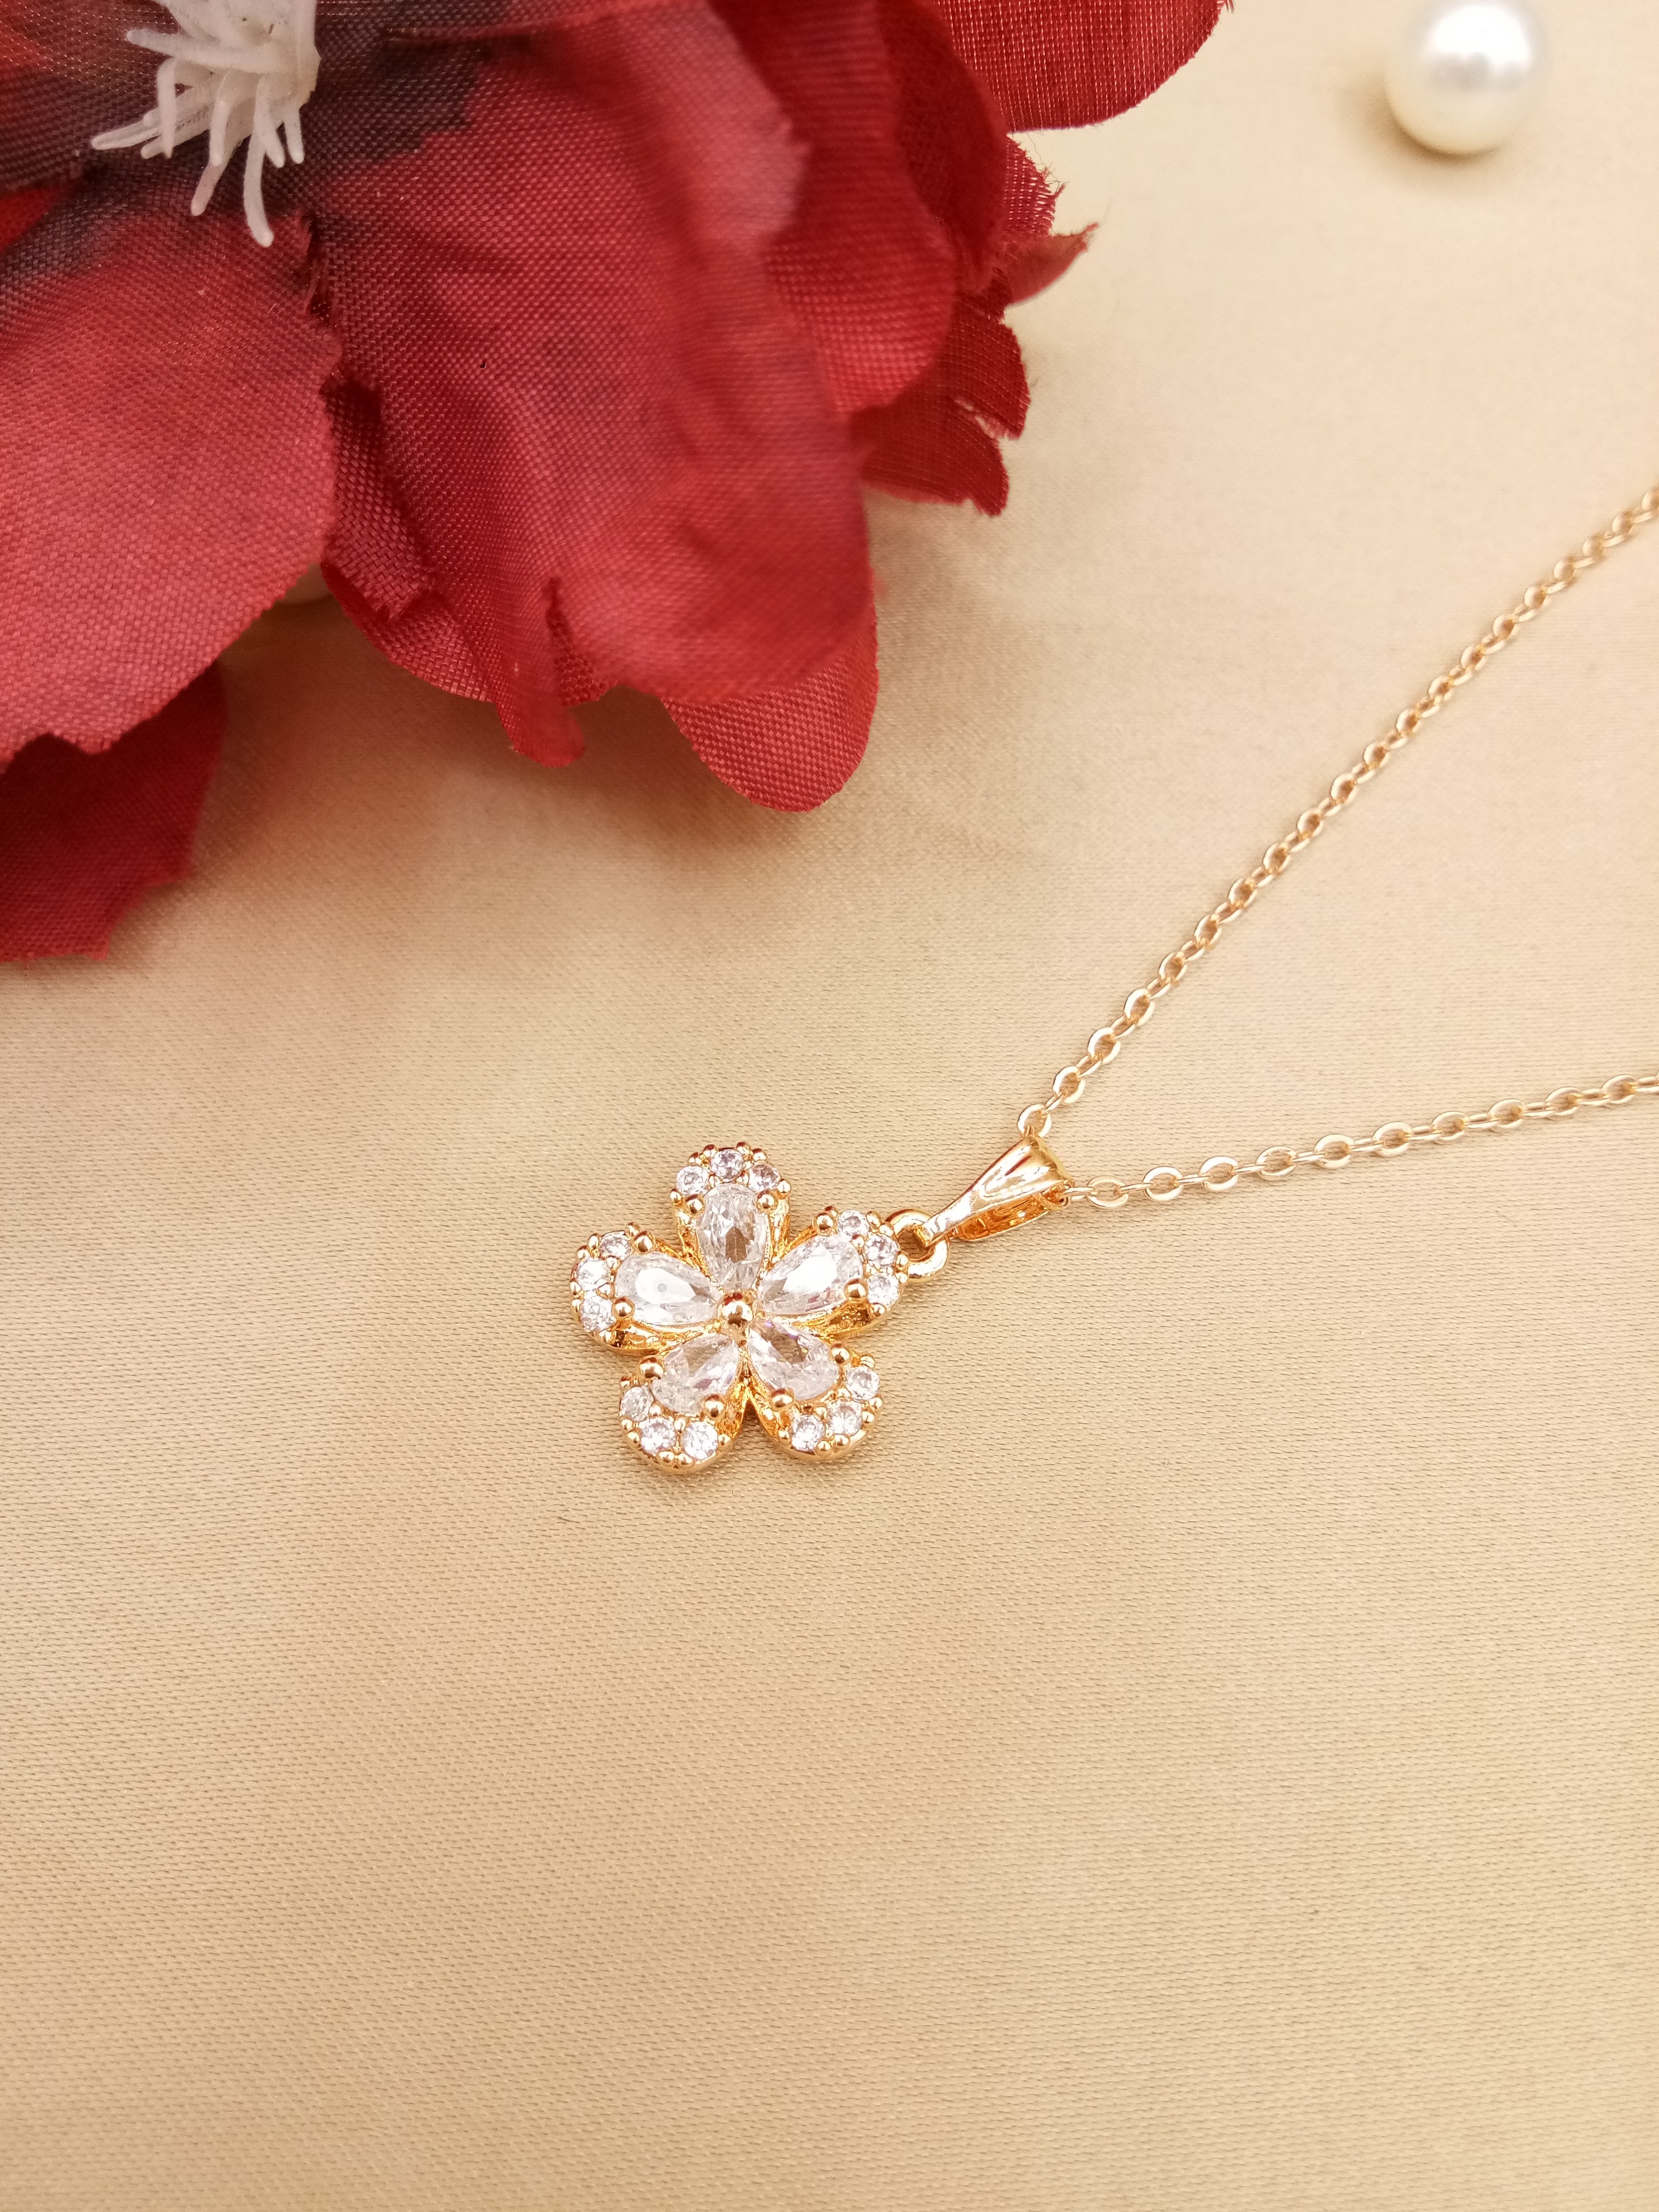 AD ROSE PENDENT - 07169 NX